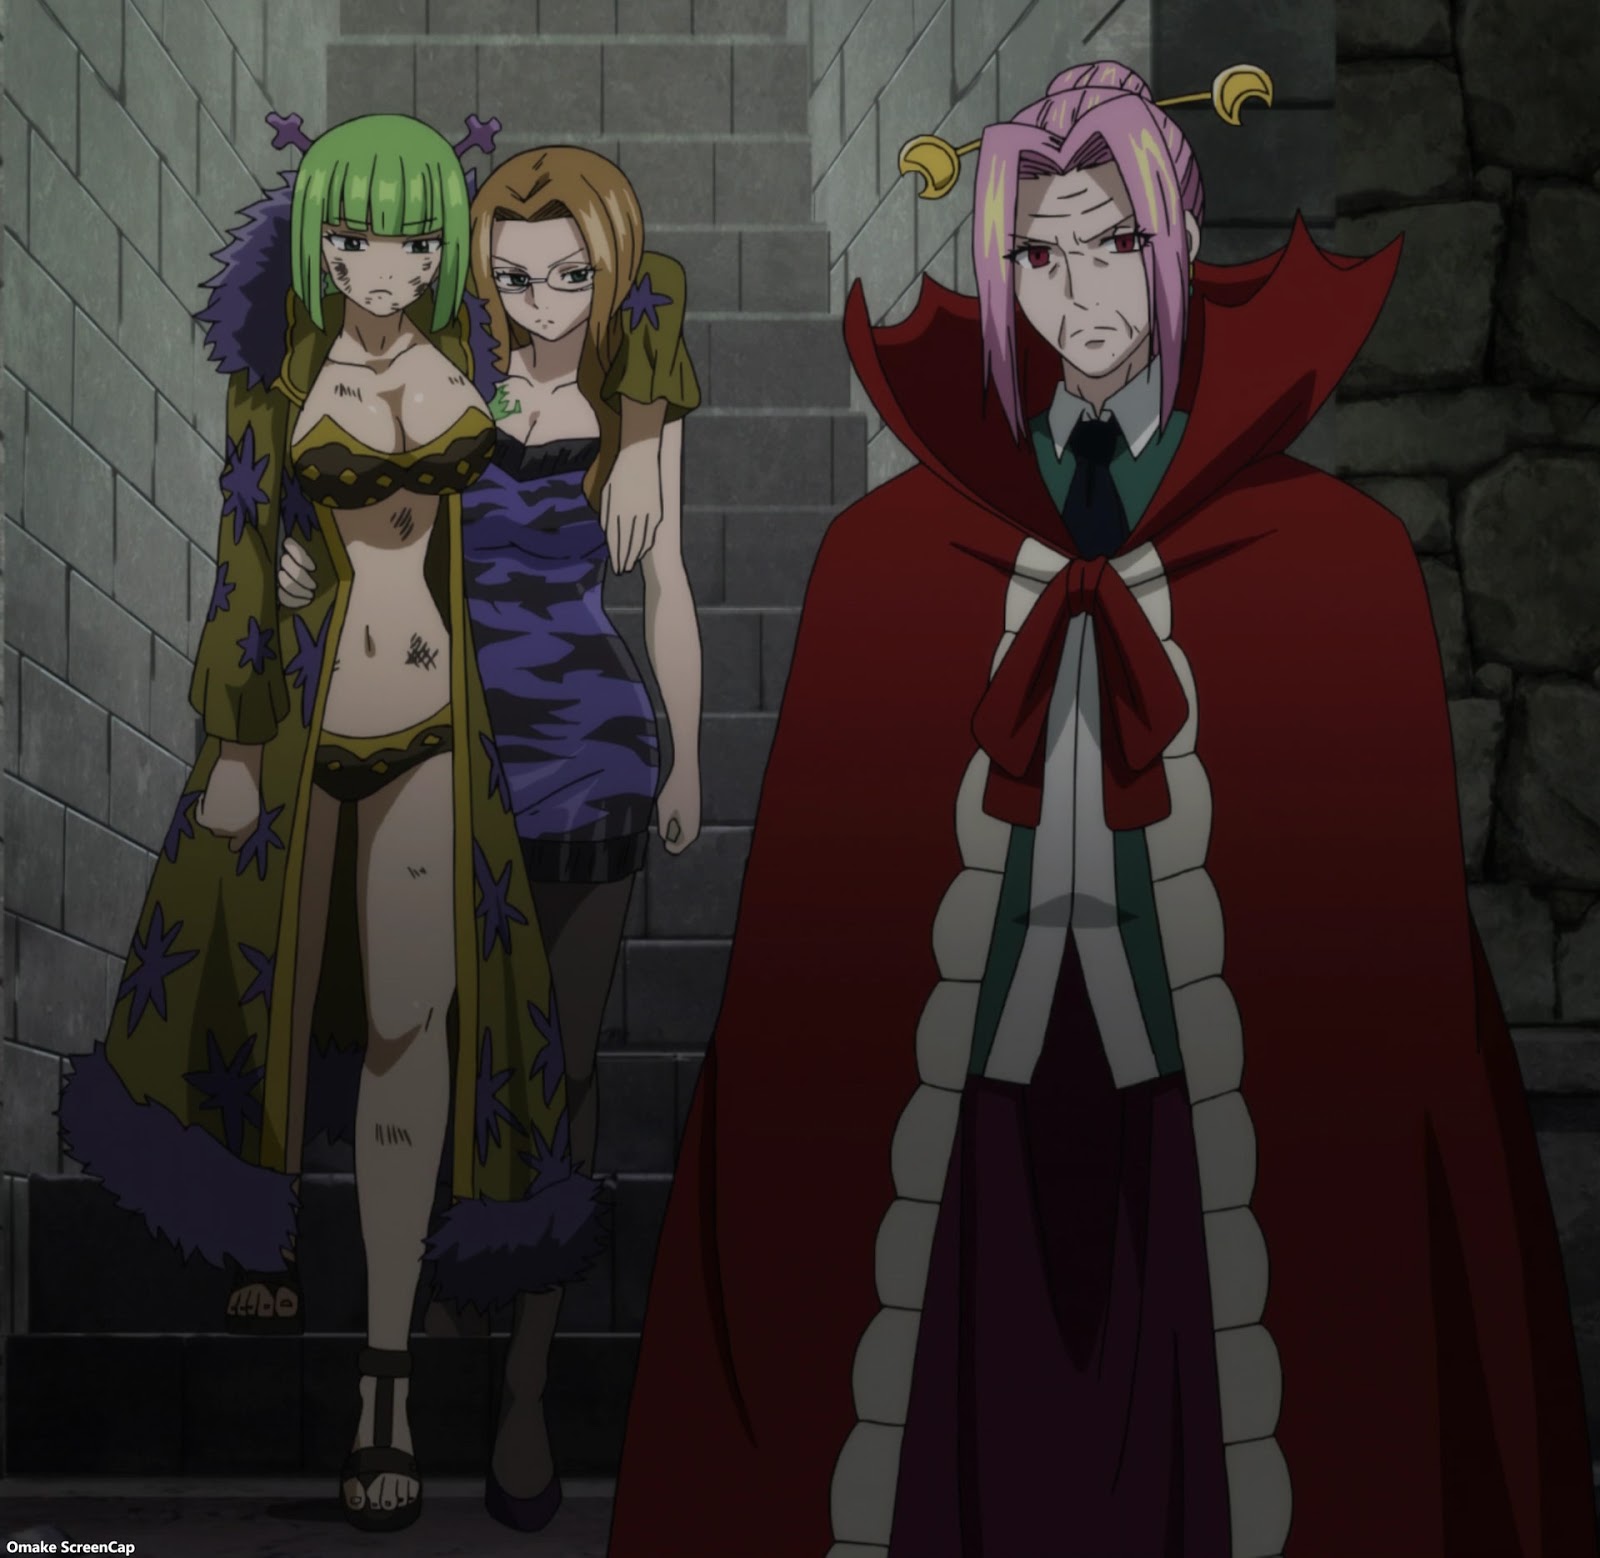 Omake Gif Anime - Fairy Tail Final Season - Episode 308 - Levy Happy to See...